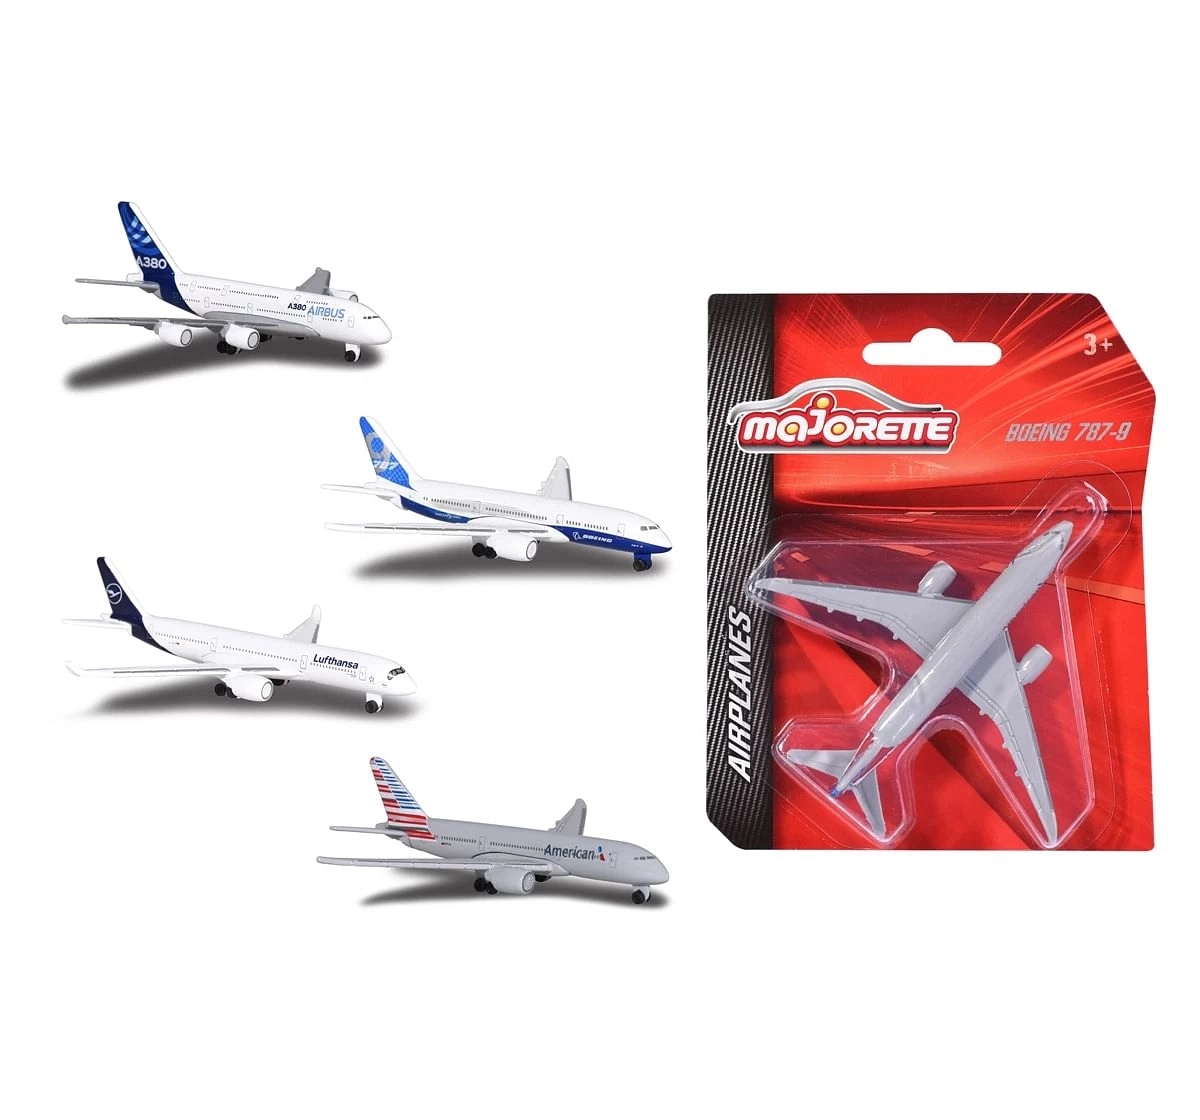 Majorette Airport License 4 13 Cm, Diecast Vehicle, Collectible Model For Kids, 3Y+, Assorted